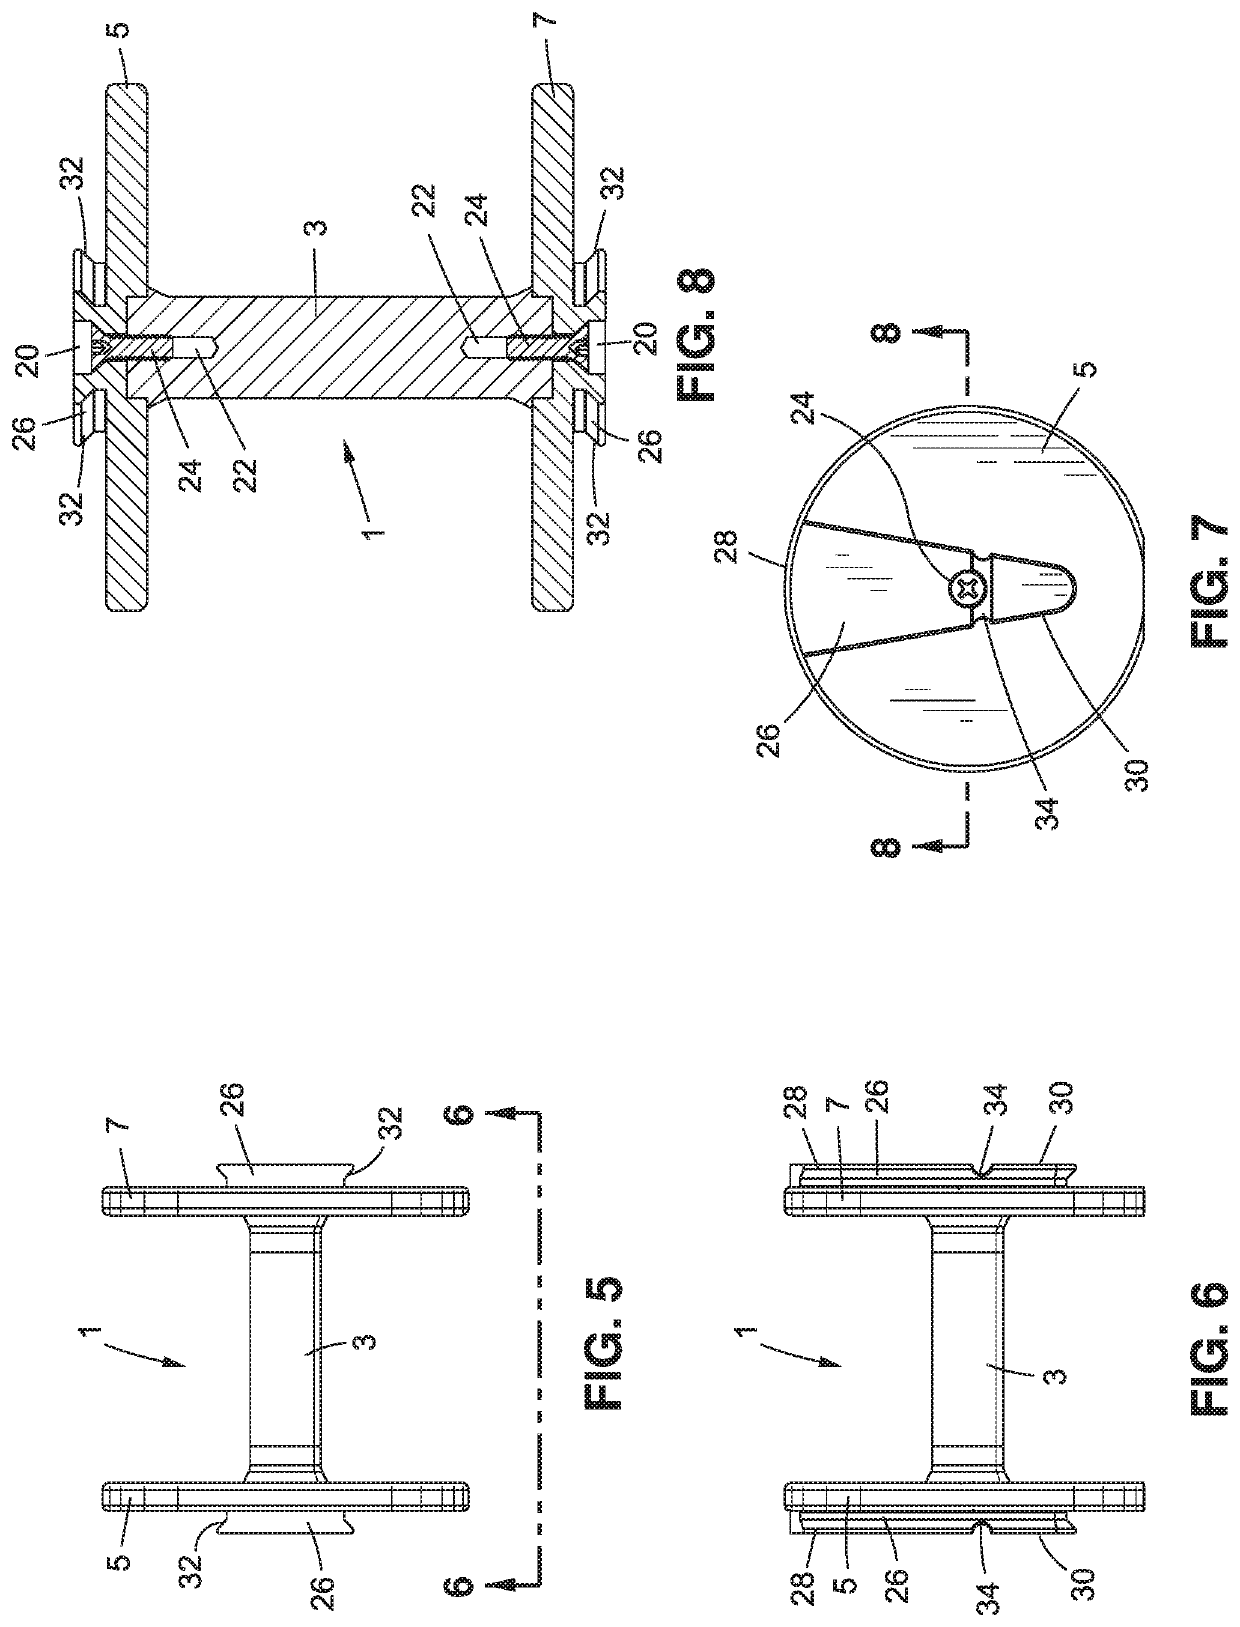 Dumbbell weight training device having selectively connected weight plates